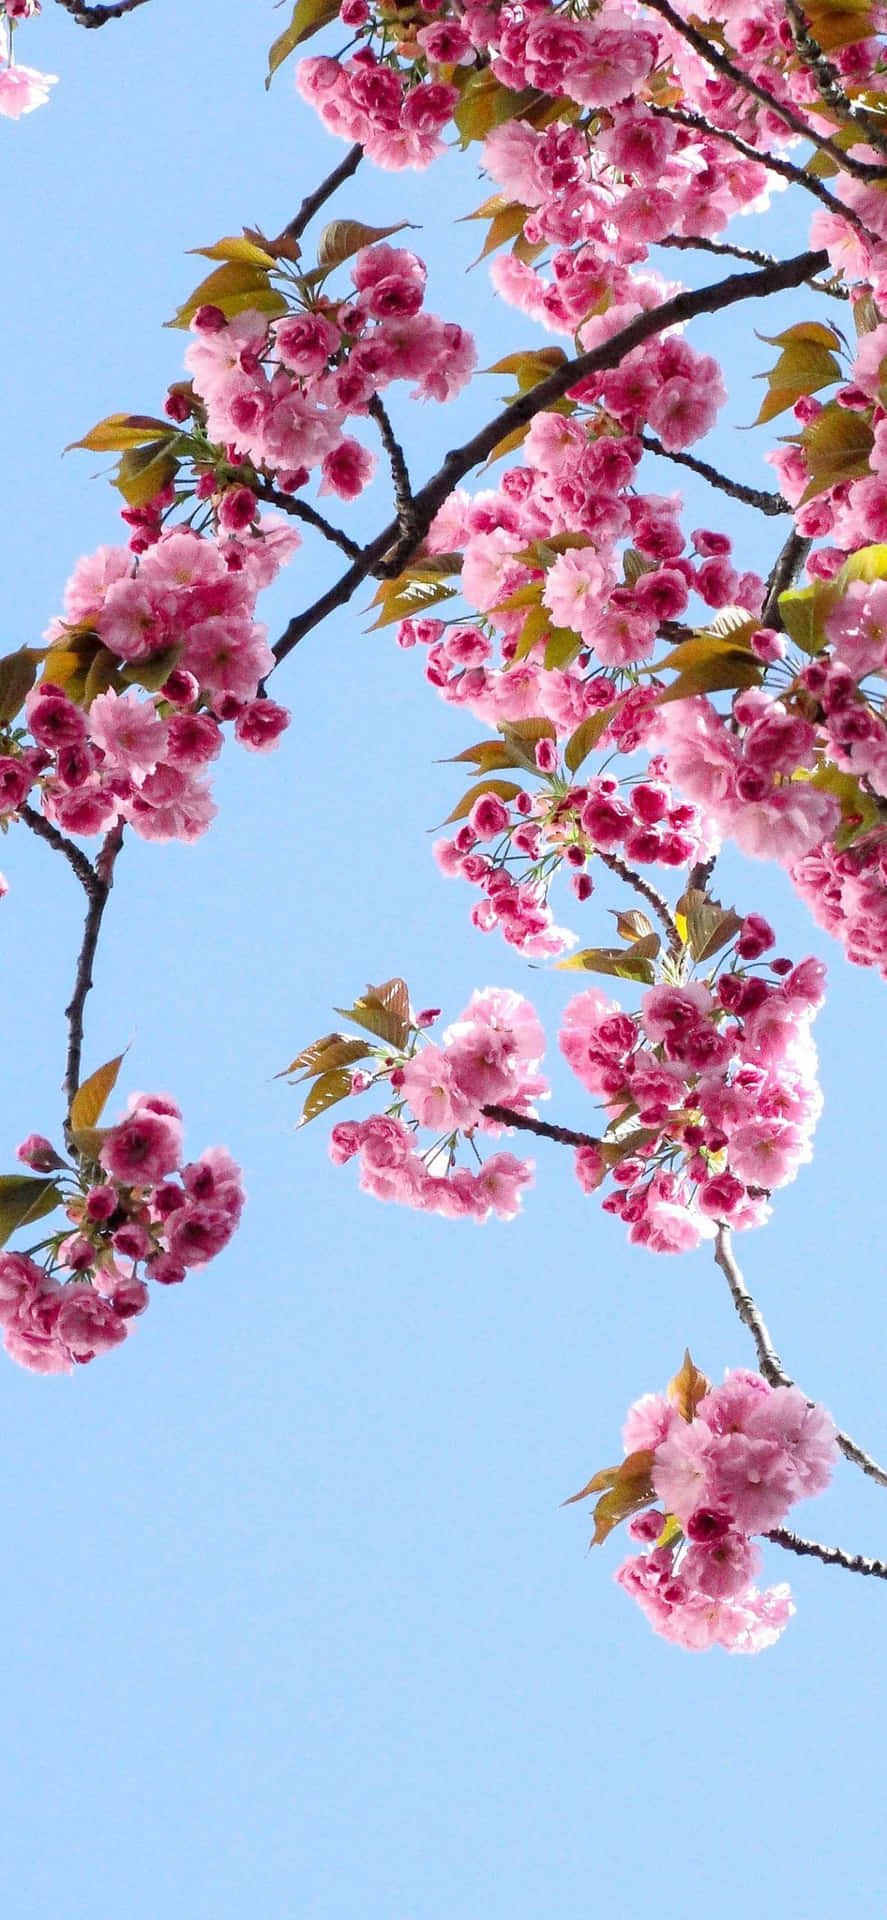 "Take in the beauty of spring with this cute iphone wallpaper!" Wallpaper